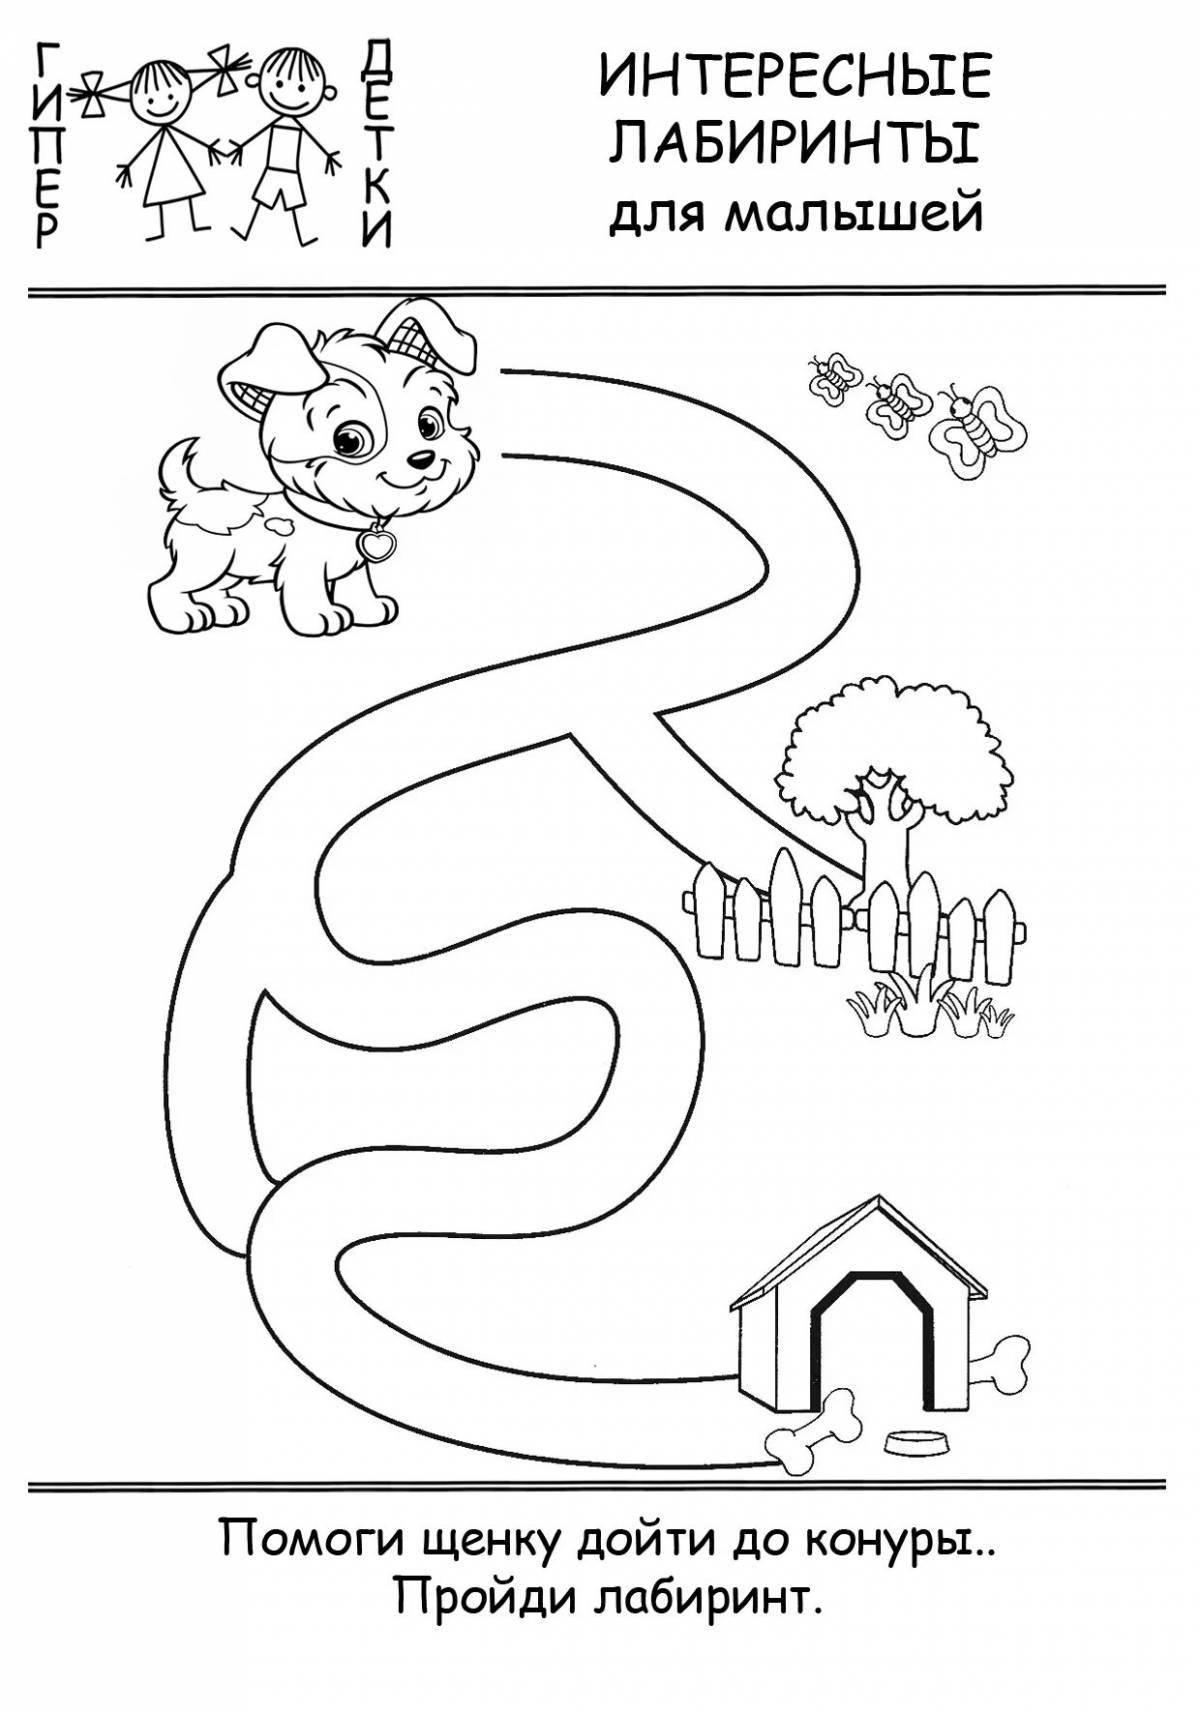 Intriguing maze coloring book for 3-4 year olds